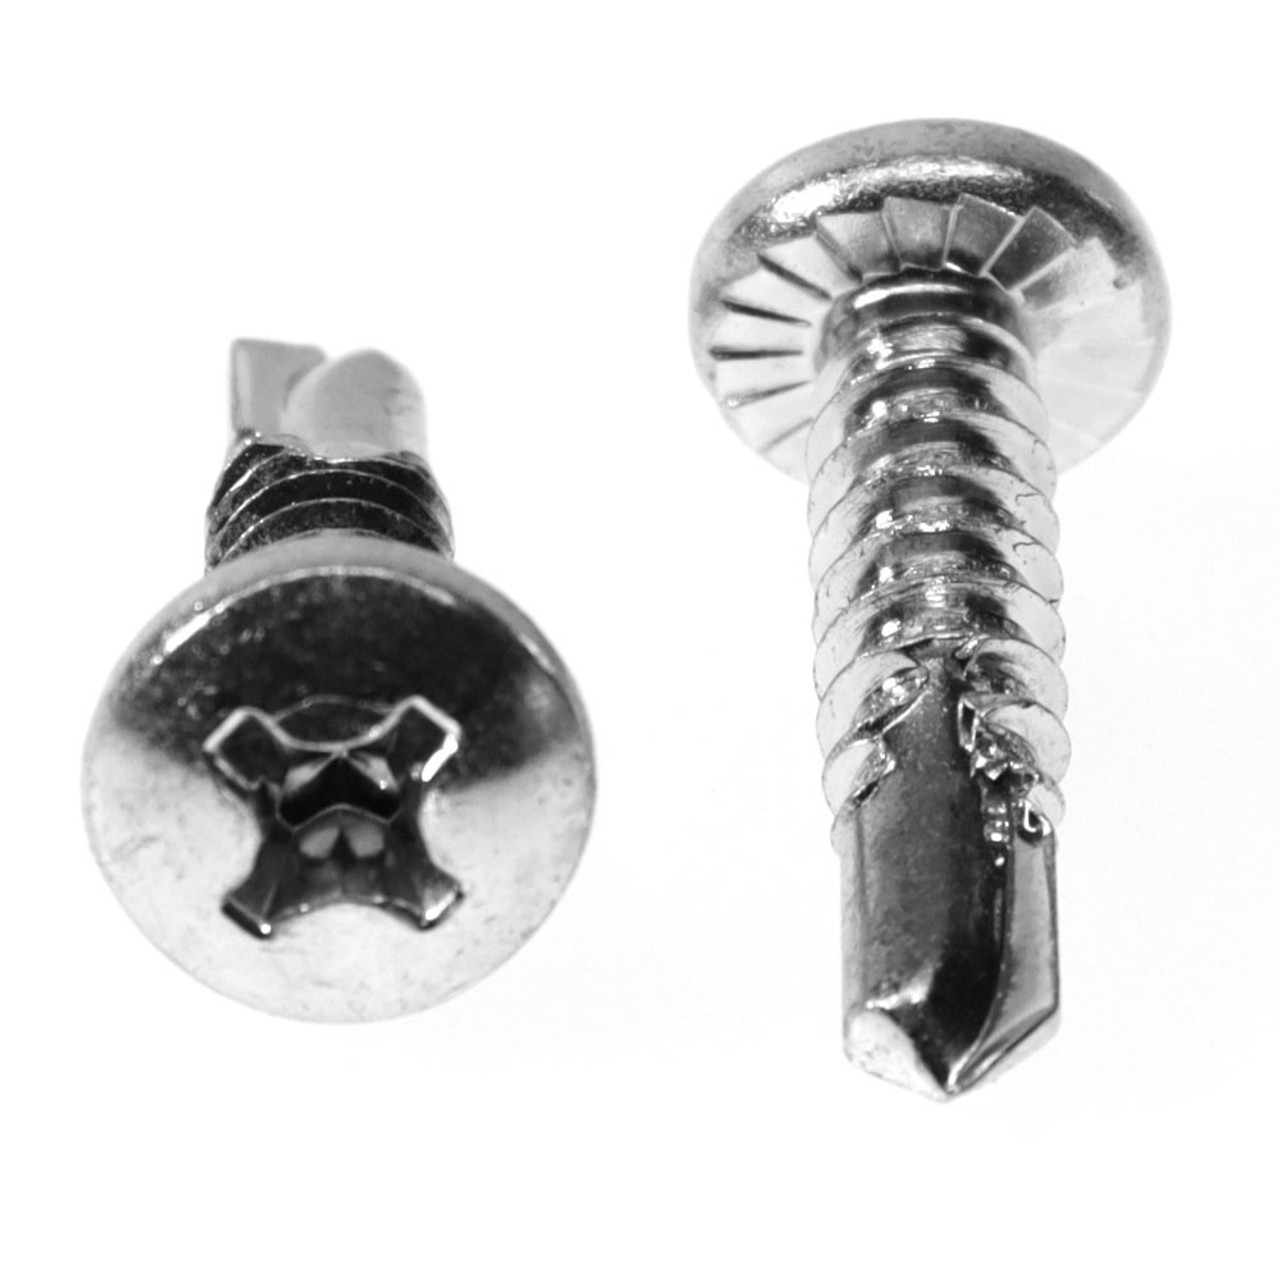 #10-16 x 5/8" (FT) Self Drilling Screw Phillips Pan Head with Serration #3 Point Low Carbon Steel Zinc Plated